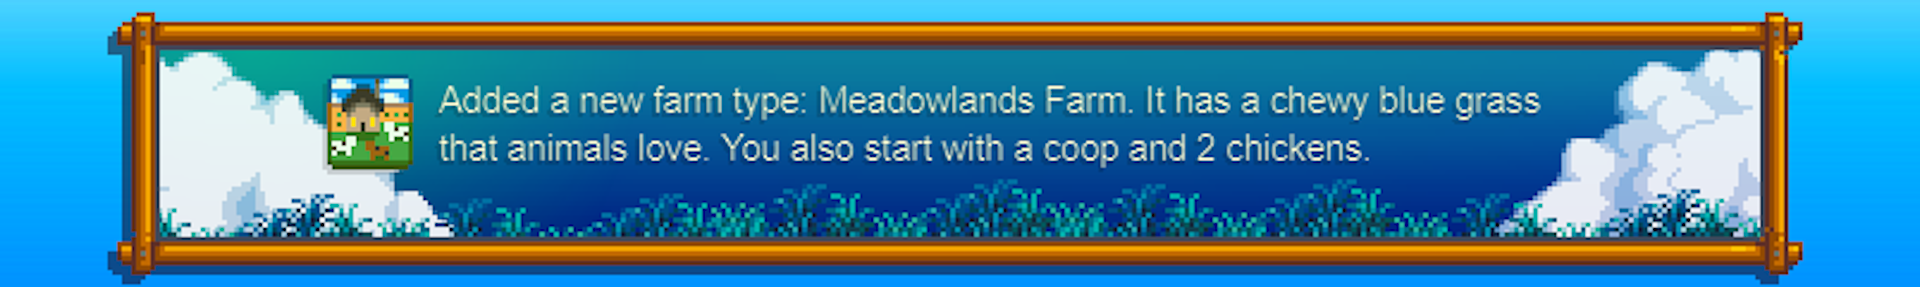 Added a new farm type: Meadowlands Farm. It has a chewy blue grass that animals love. You also start with a coop and two chickens.